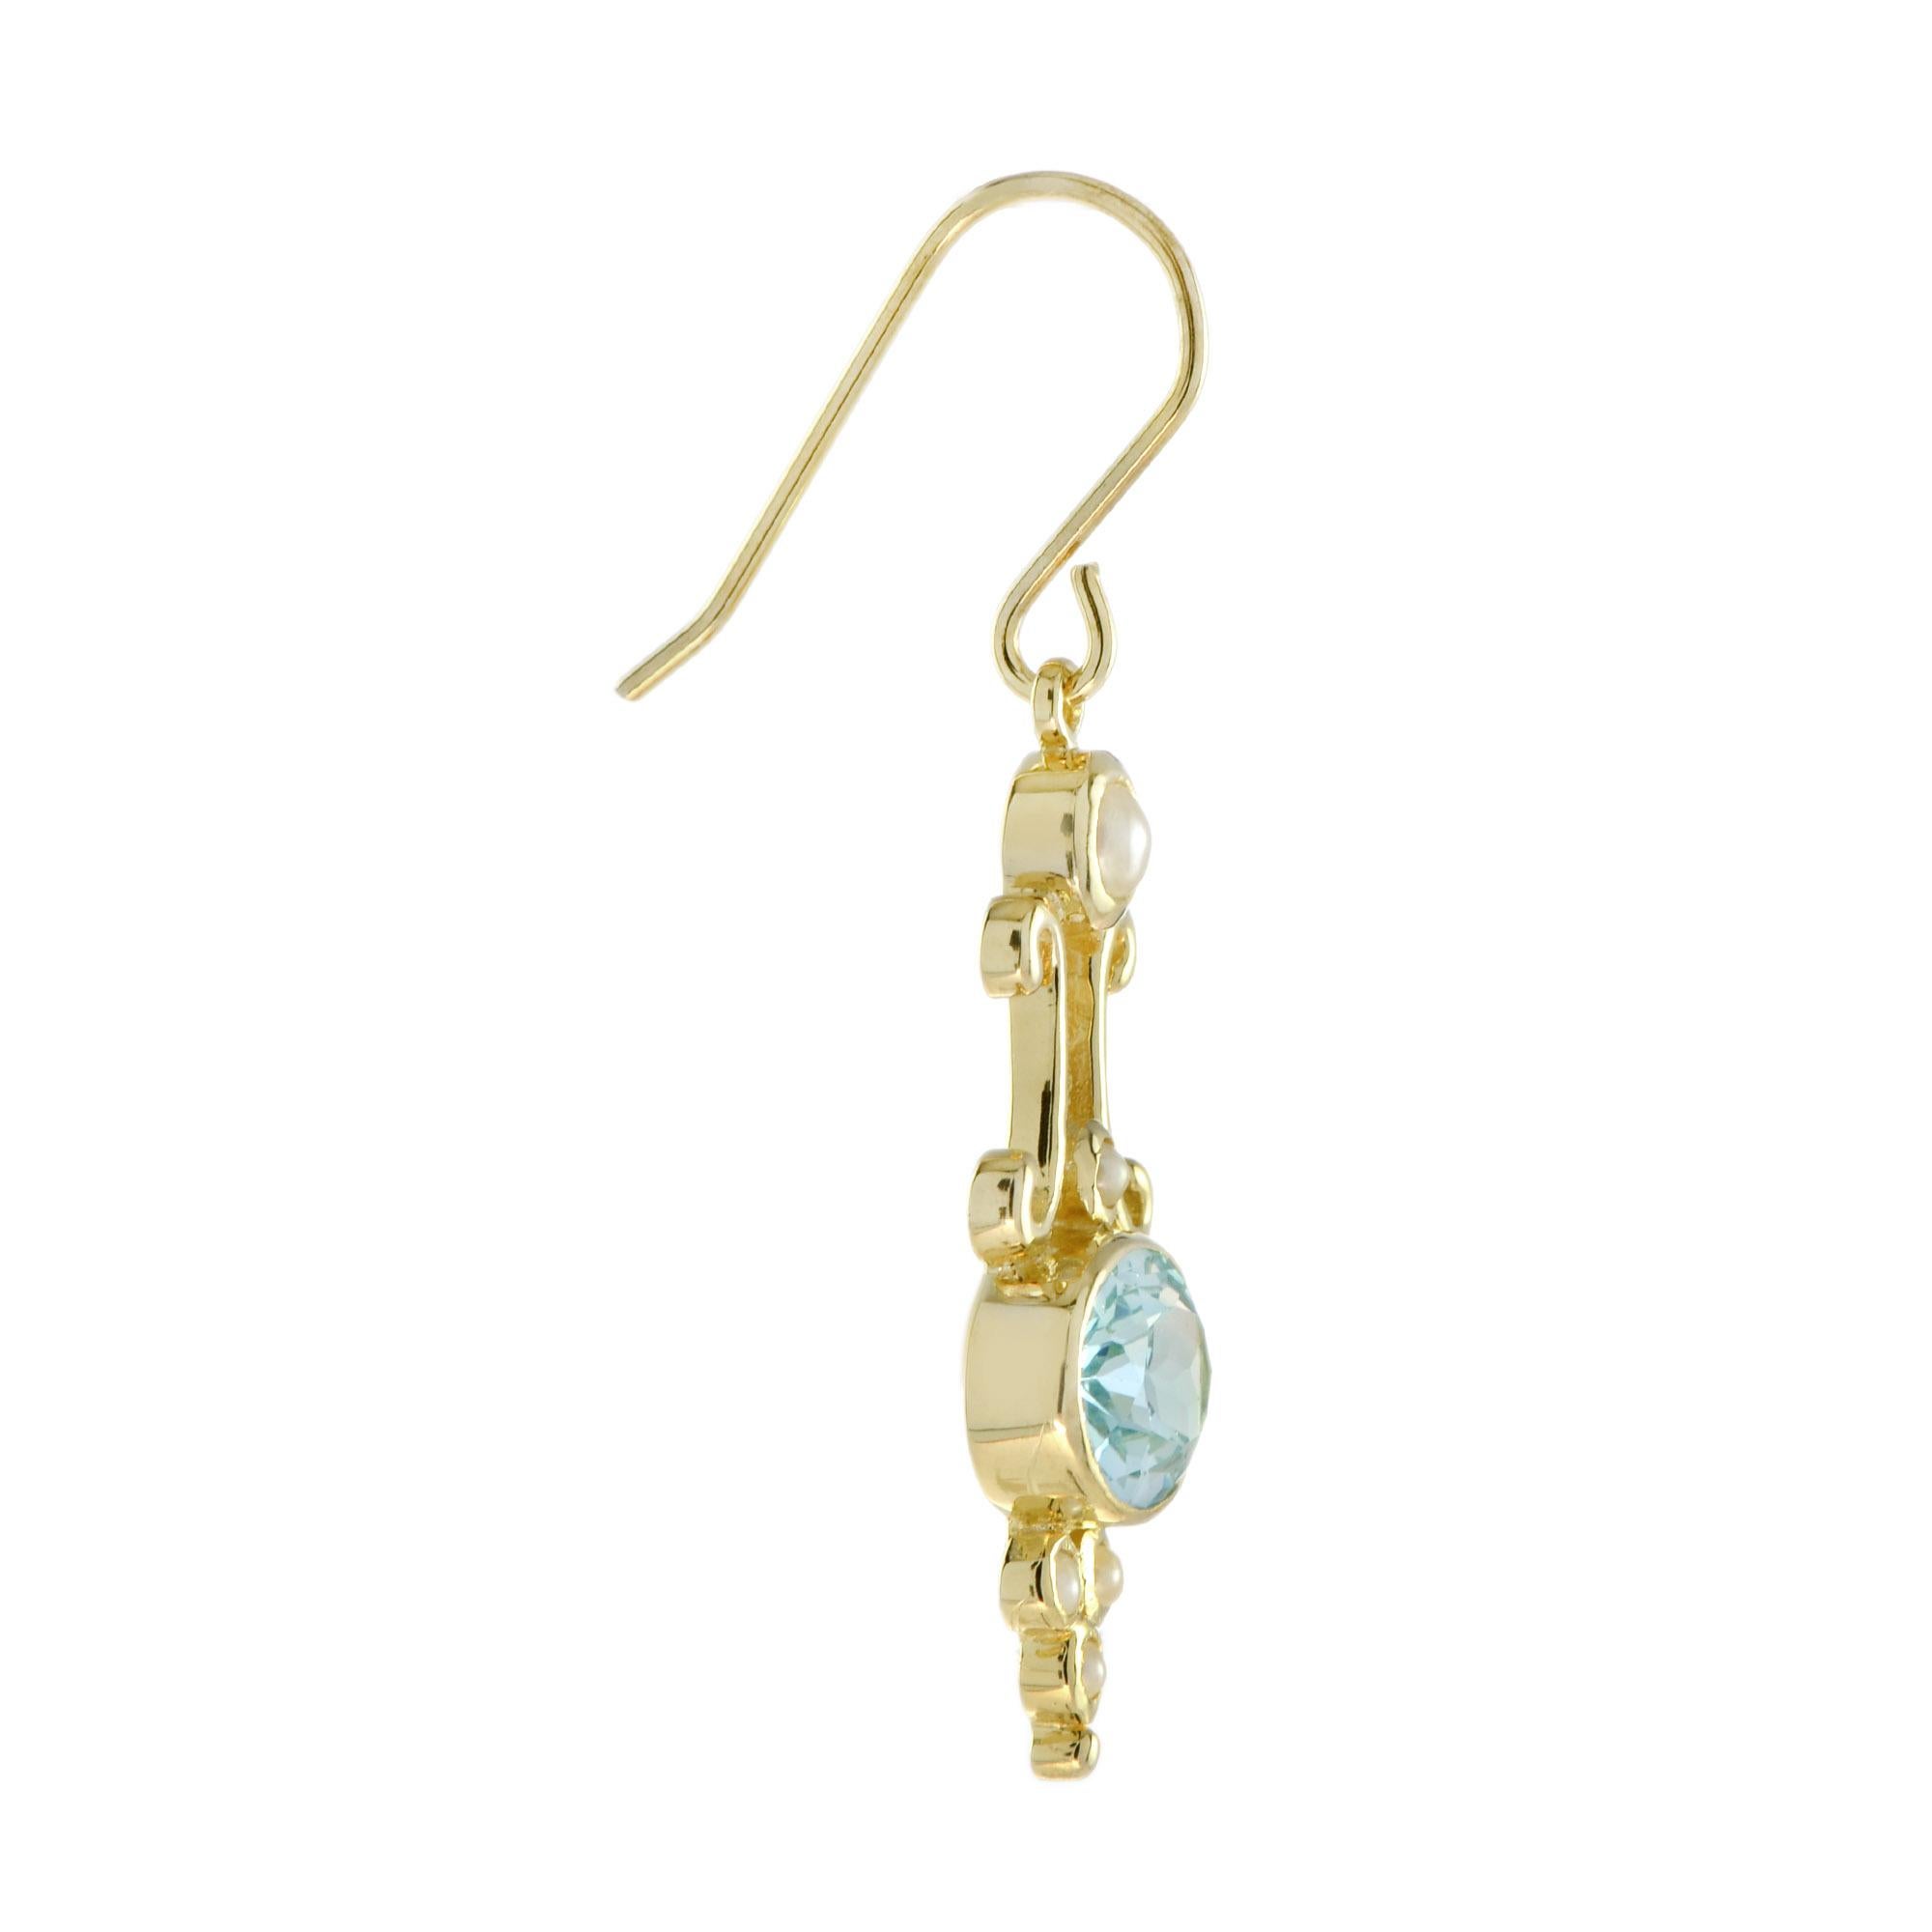 Dainty Victorian design, handcrafted of blue topaz and pearls set into 14k yellow gold, is alluring at any hours of the day or night. 

Information
Metal: 14K Yellow Gold
Width: 11 mm.
Length: 42 mm.
Weight: 4.60 g. (approx. in total)
Backing: